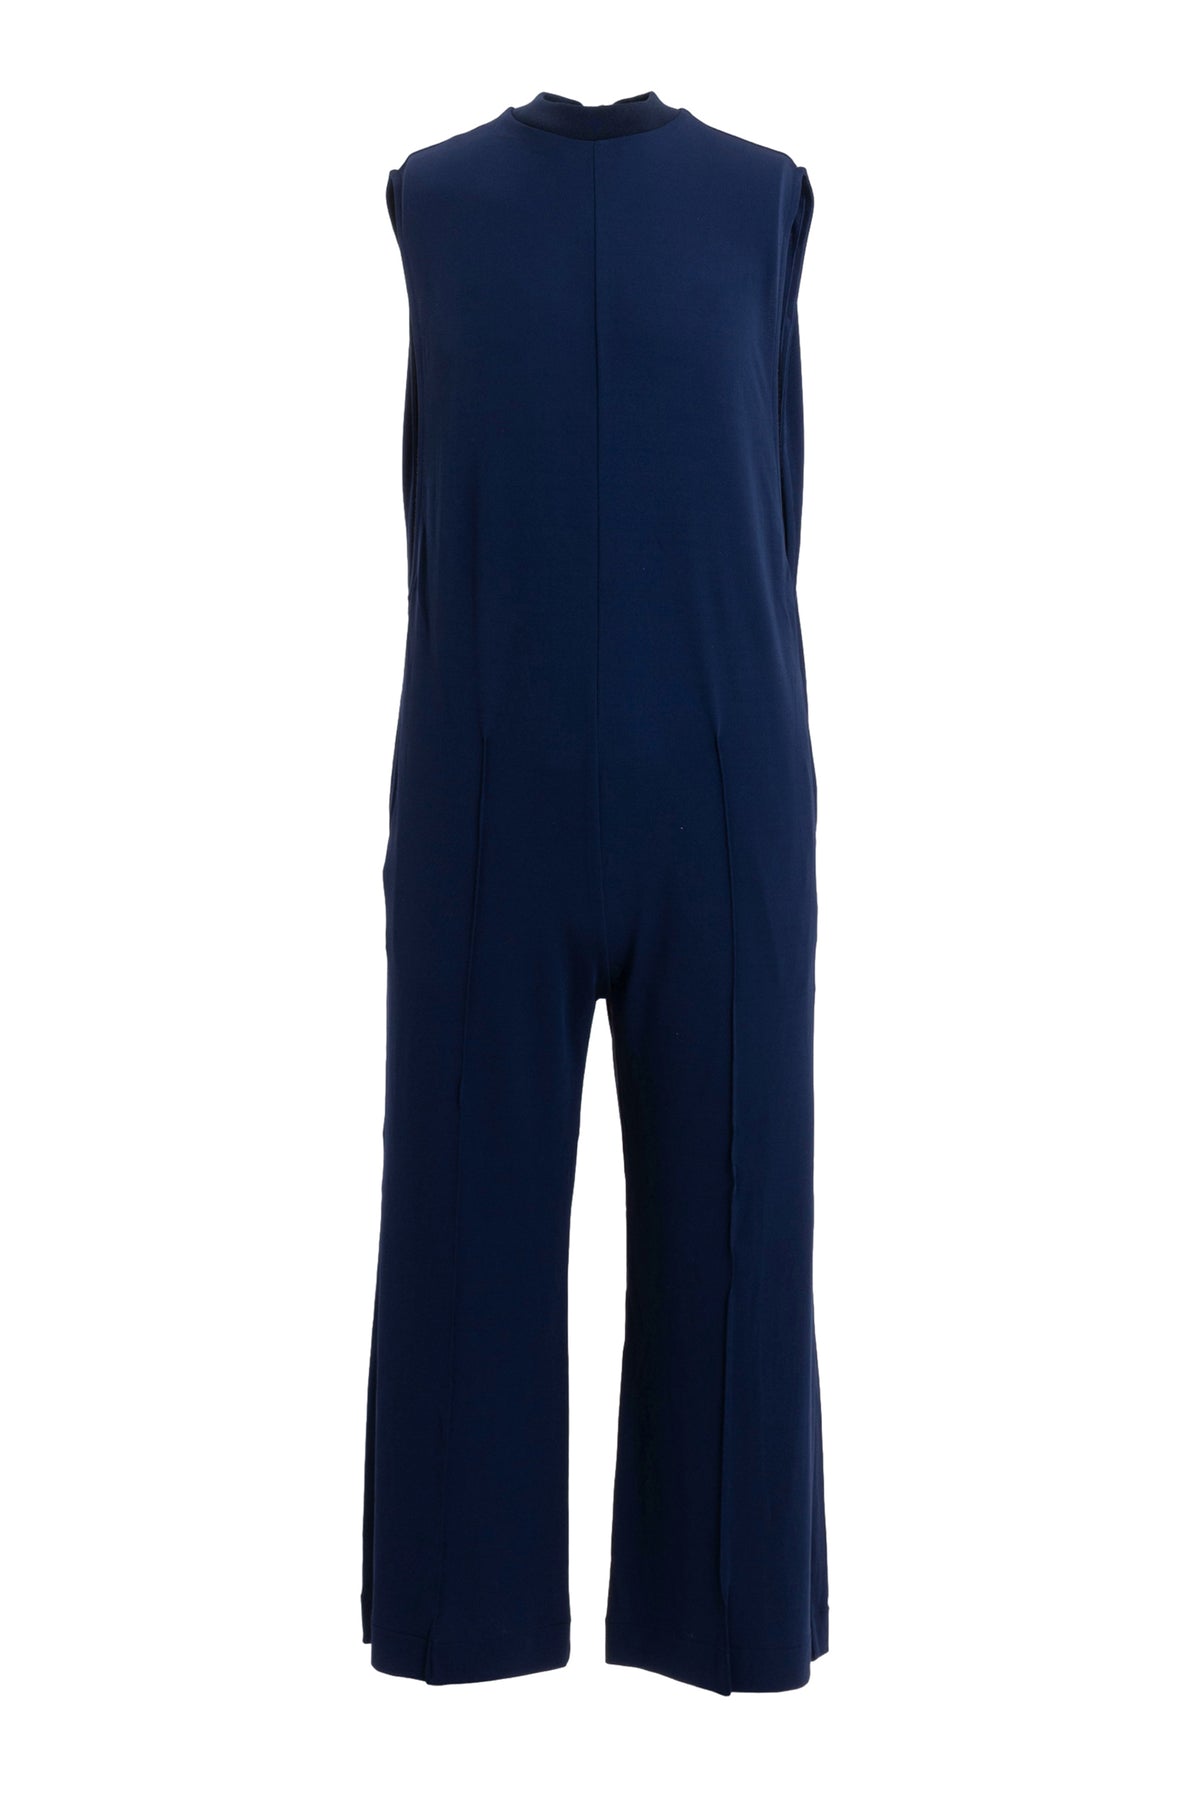 SMOOTH JERSEY JUMPSUIT / NVY